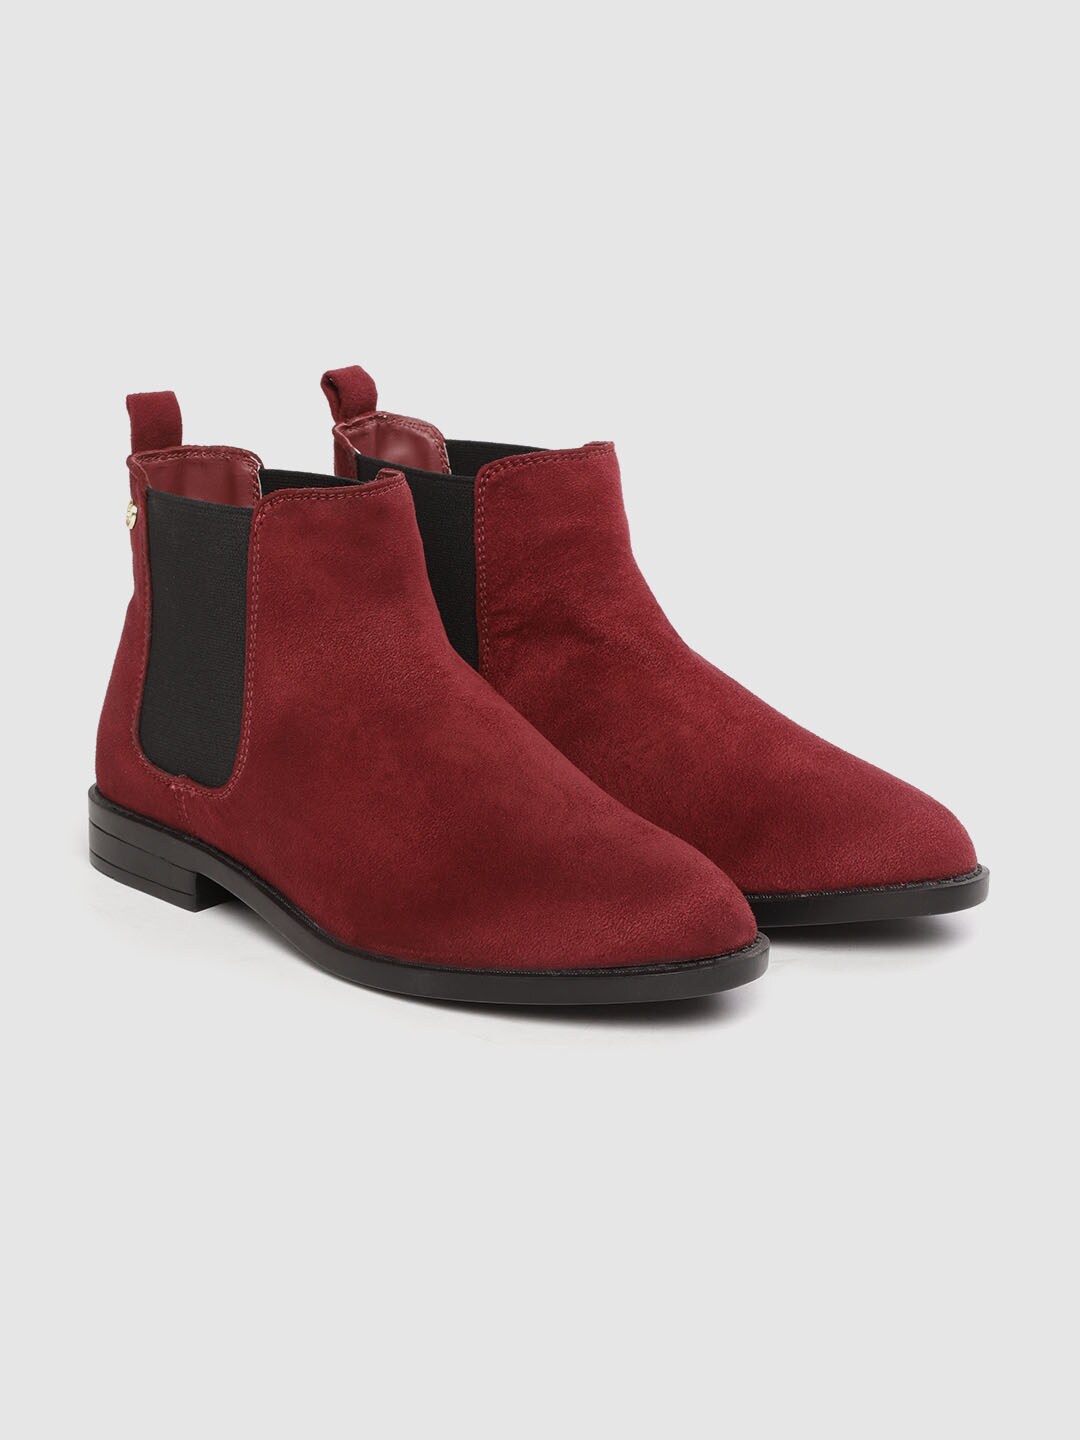 Carlton London Women Burgundy Solid Mid-Top Flat Chelsea Boots Price in India